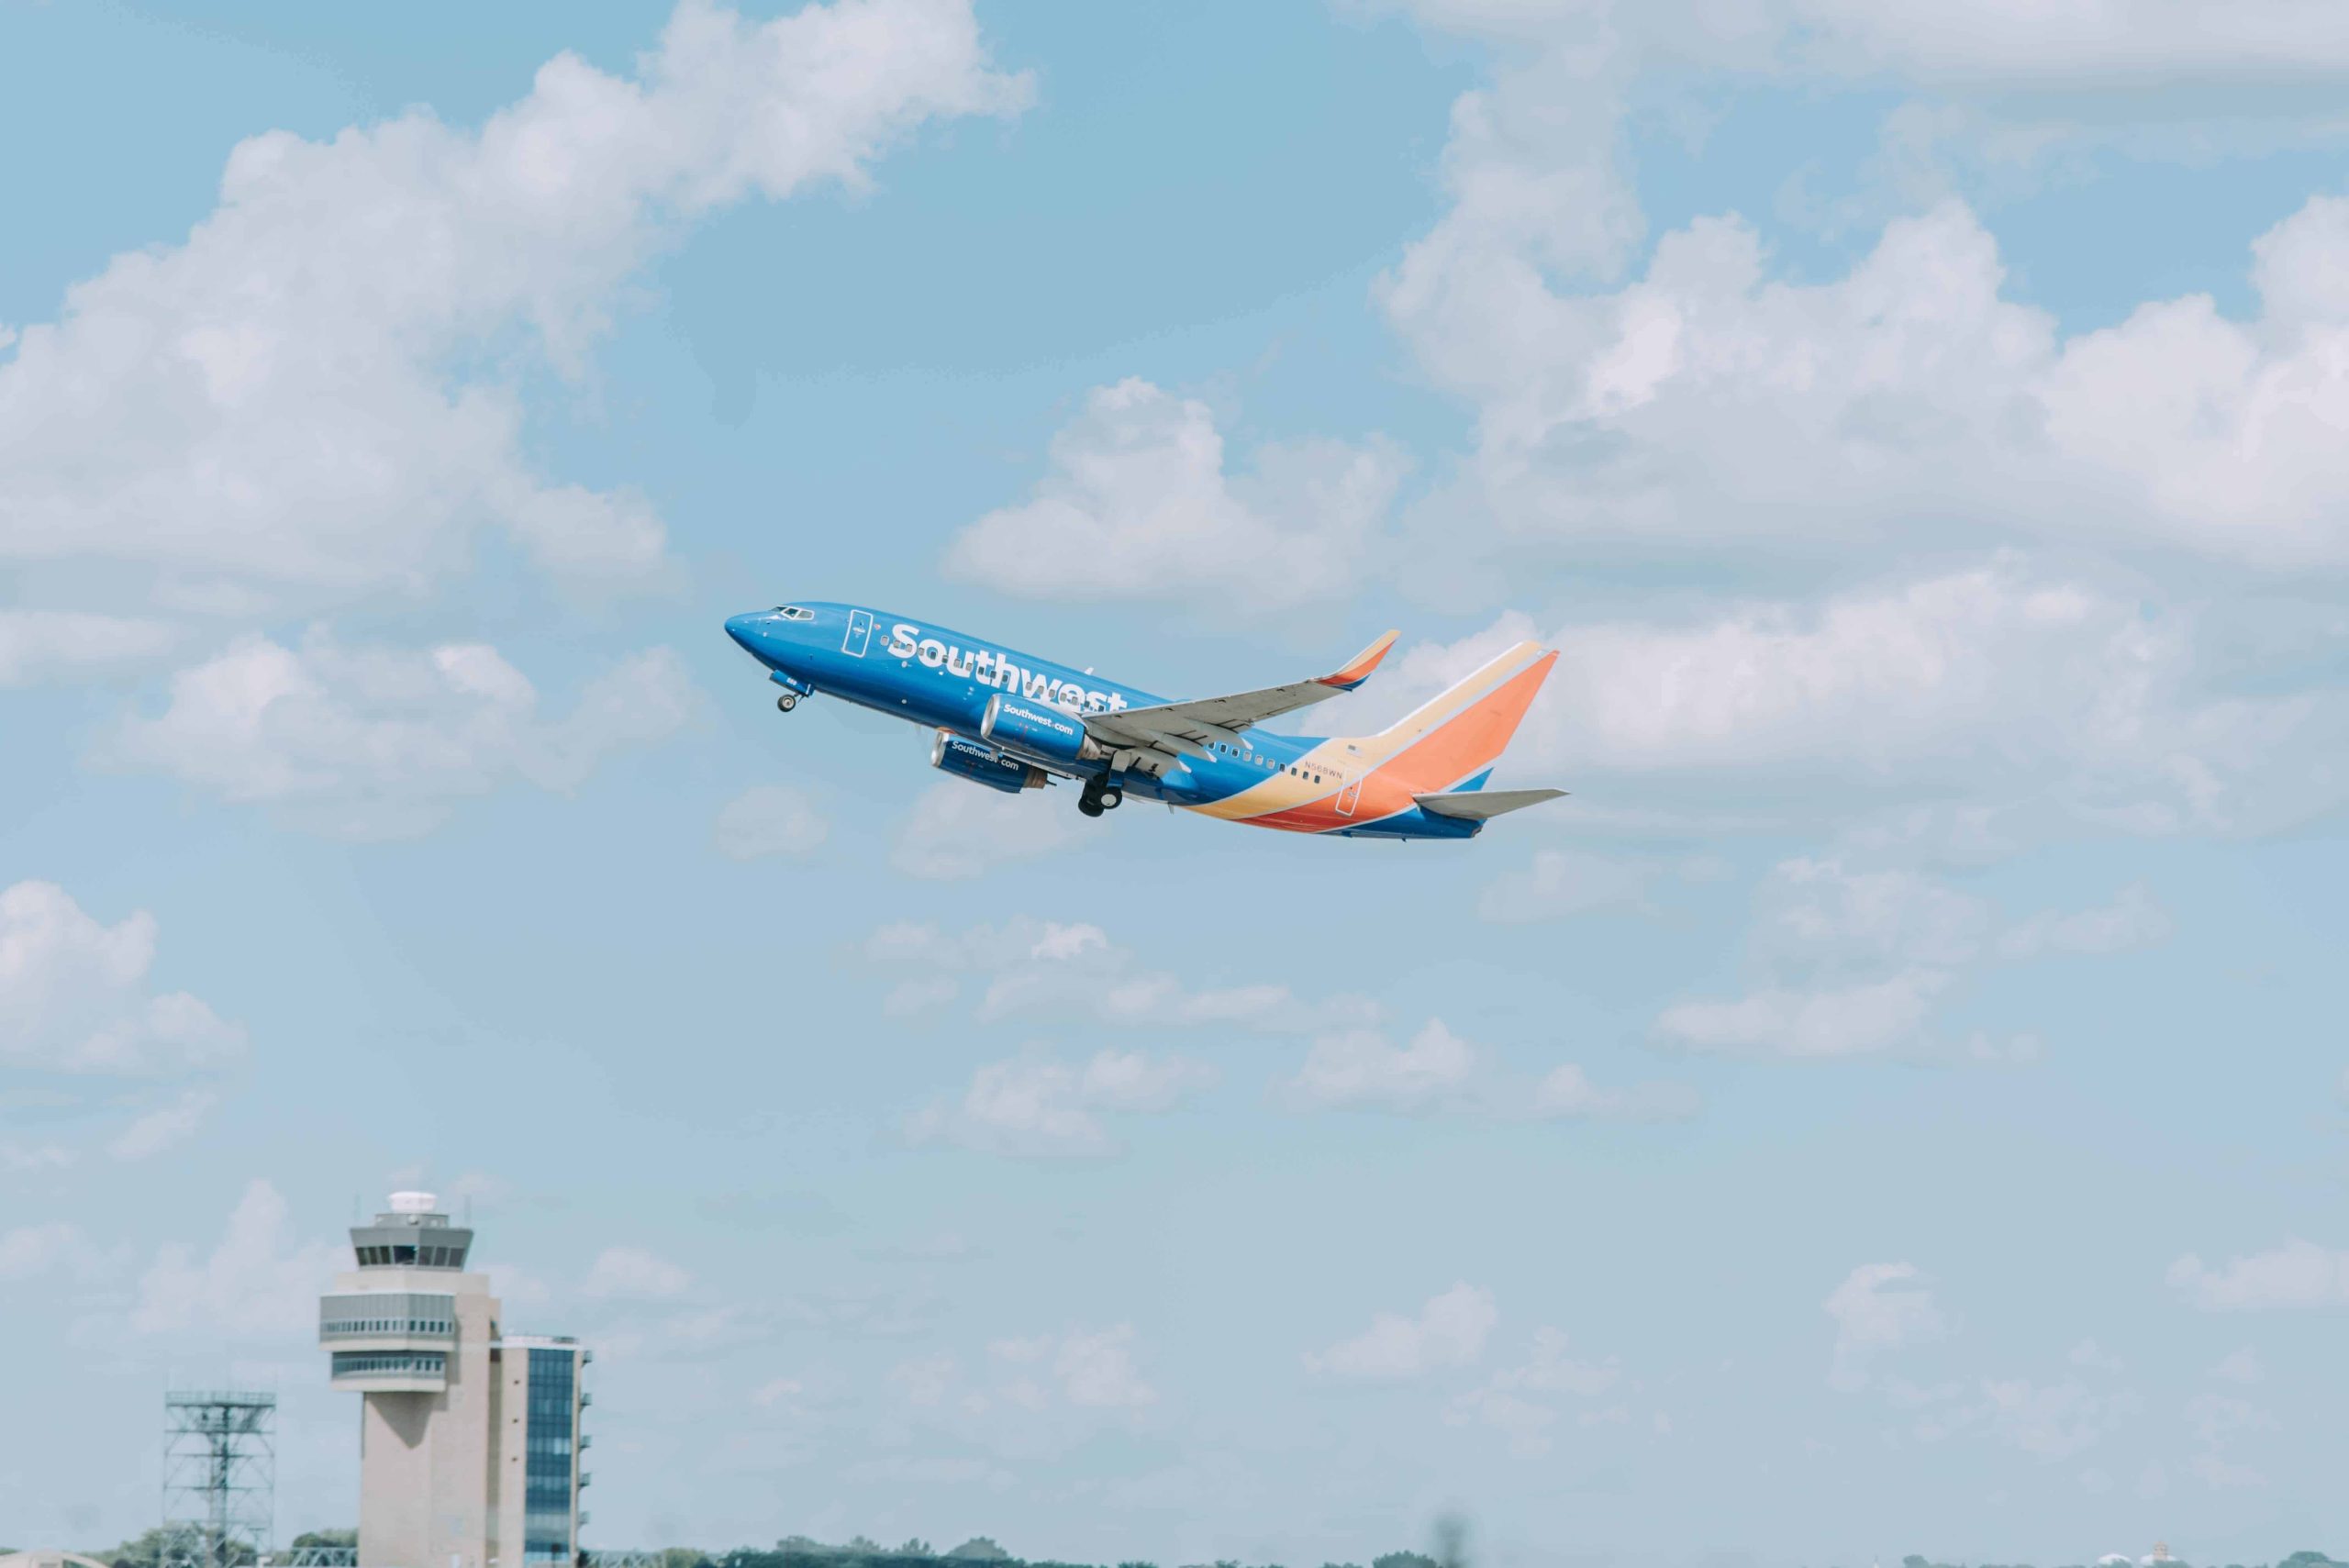 southwest airlines companion pass qualifying points